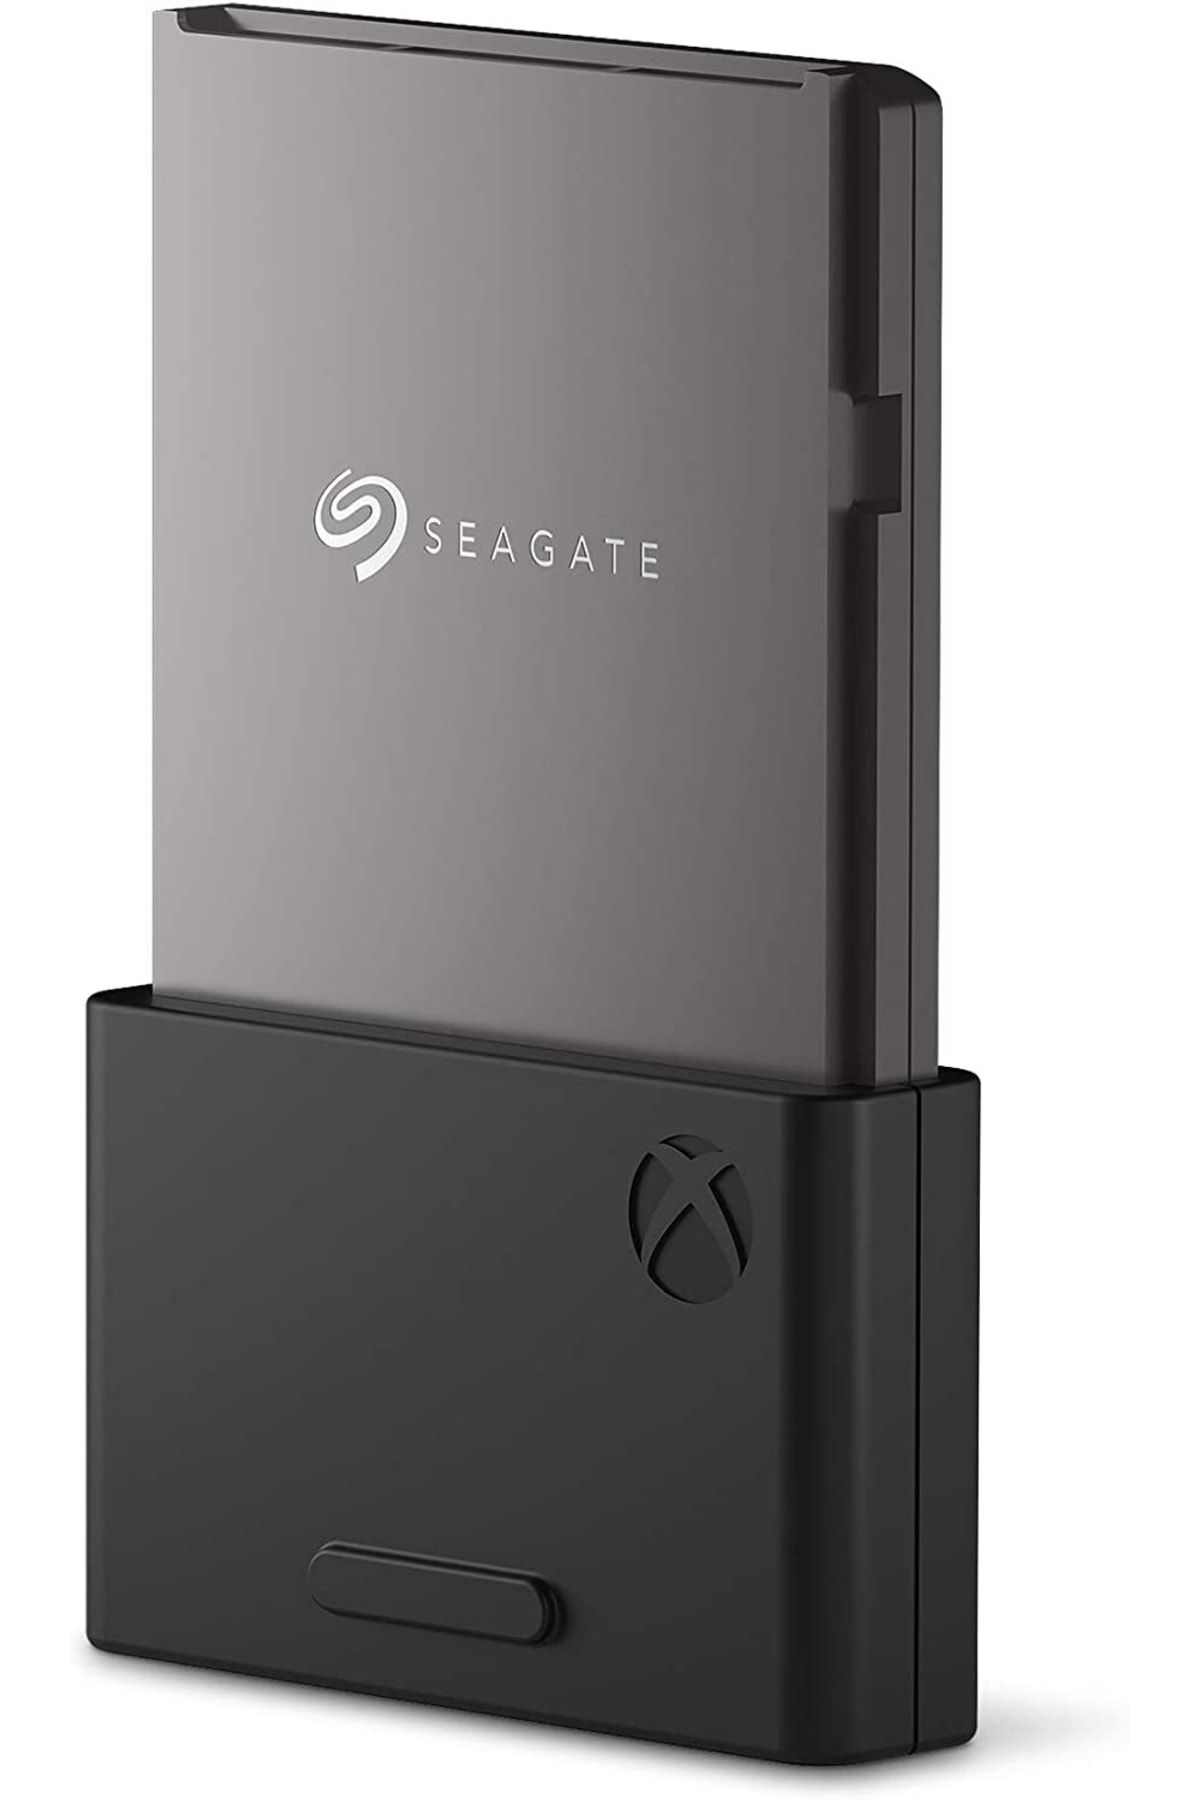 Seagate Seagate Expansion Card For Xbox Series X|s, 2tb, Ssd, Xbox Series Stjr2000400